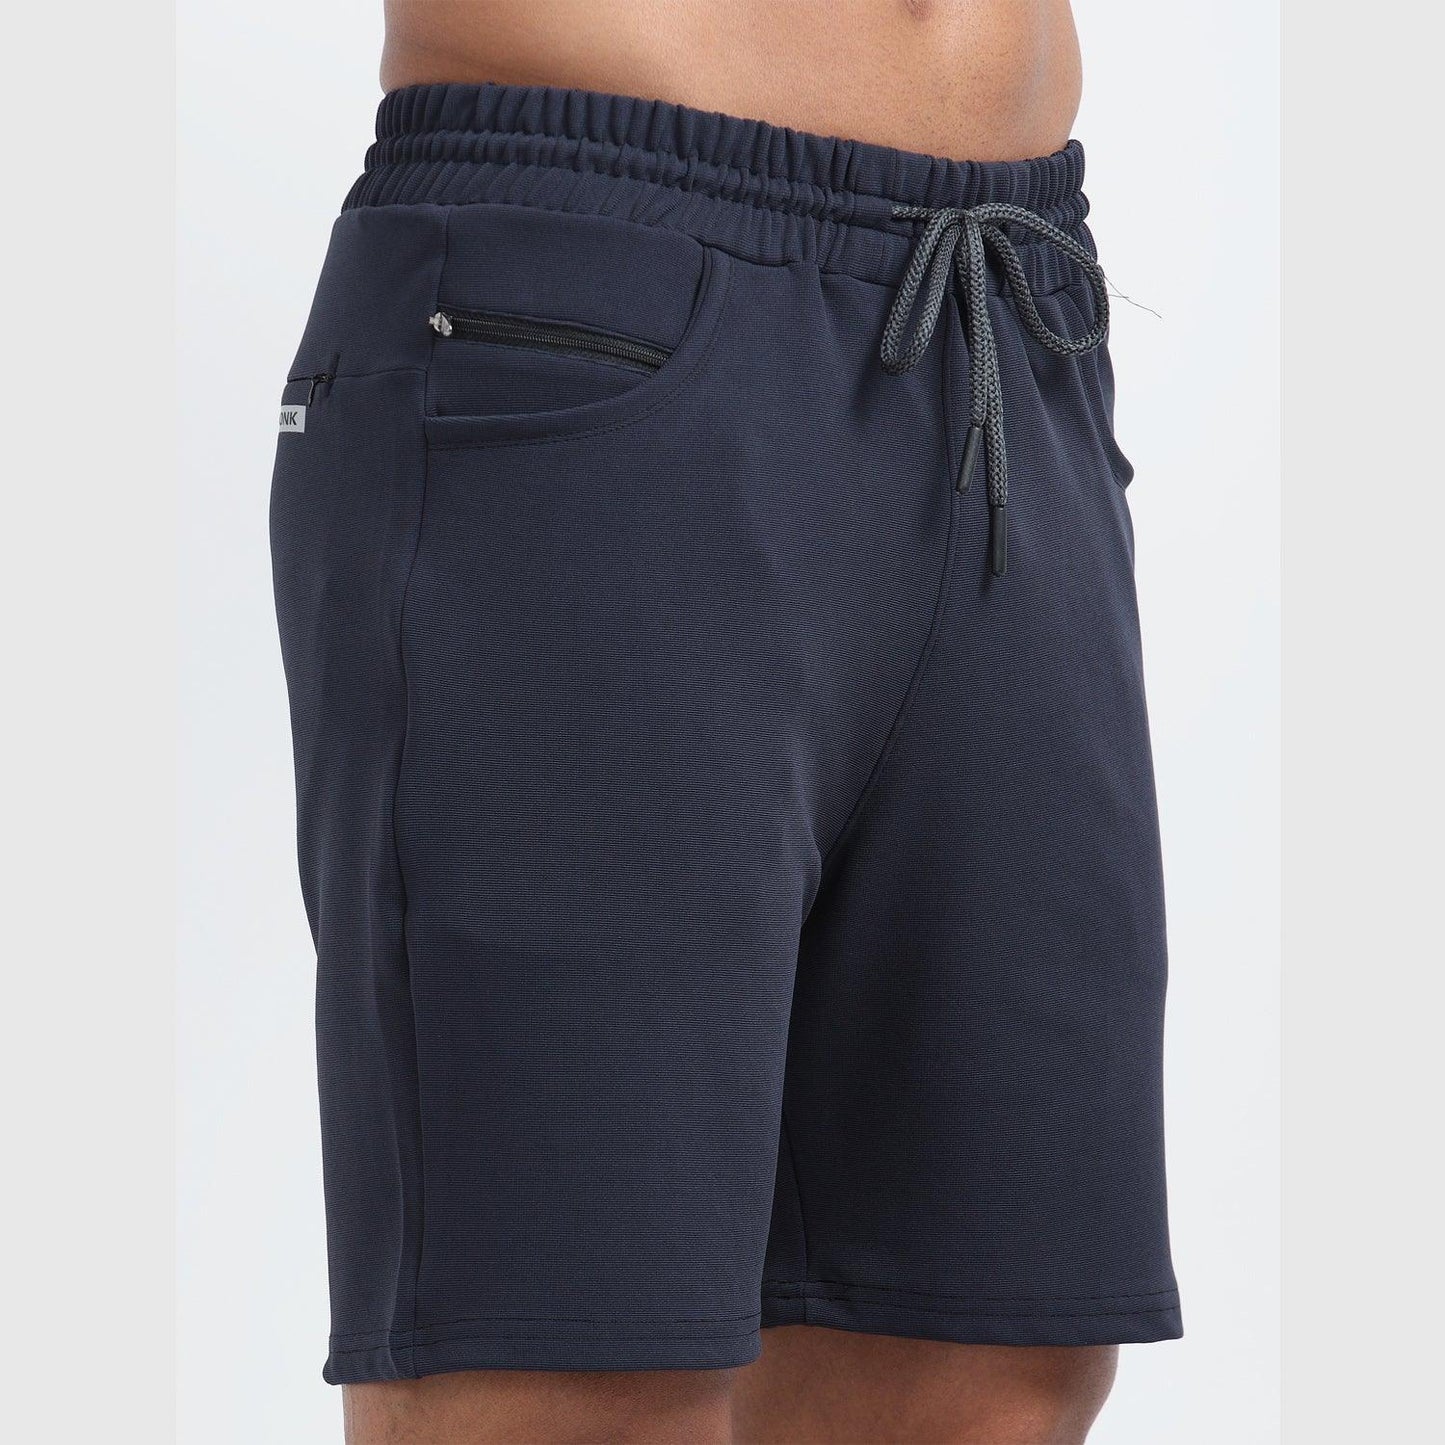 Denmonk's fashionable Retroglide Shorts charcoal shorts for men will boost your level of gym fitness.